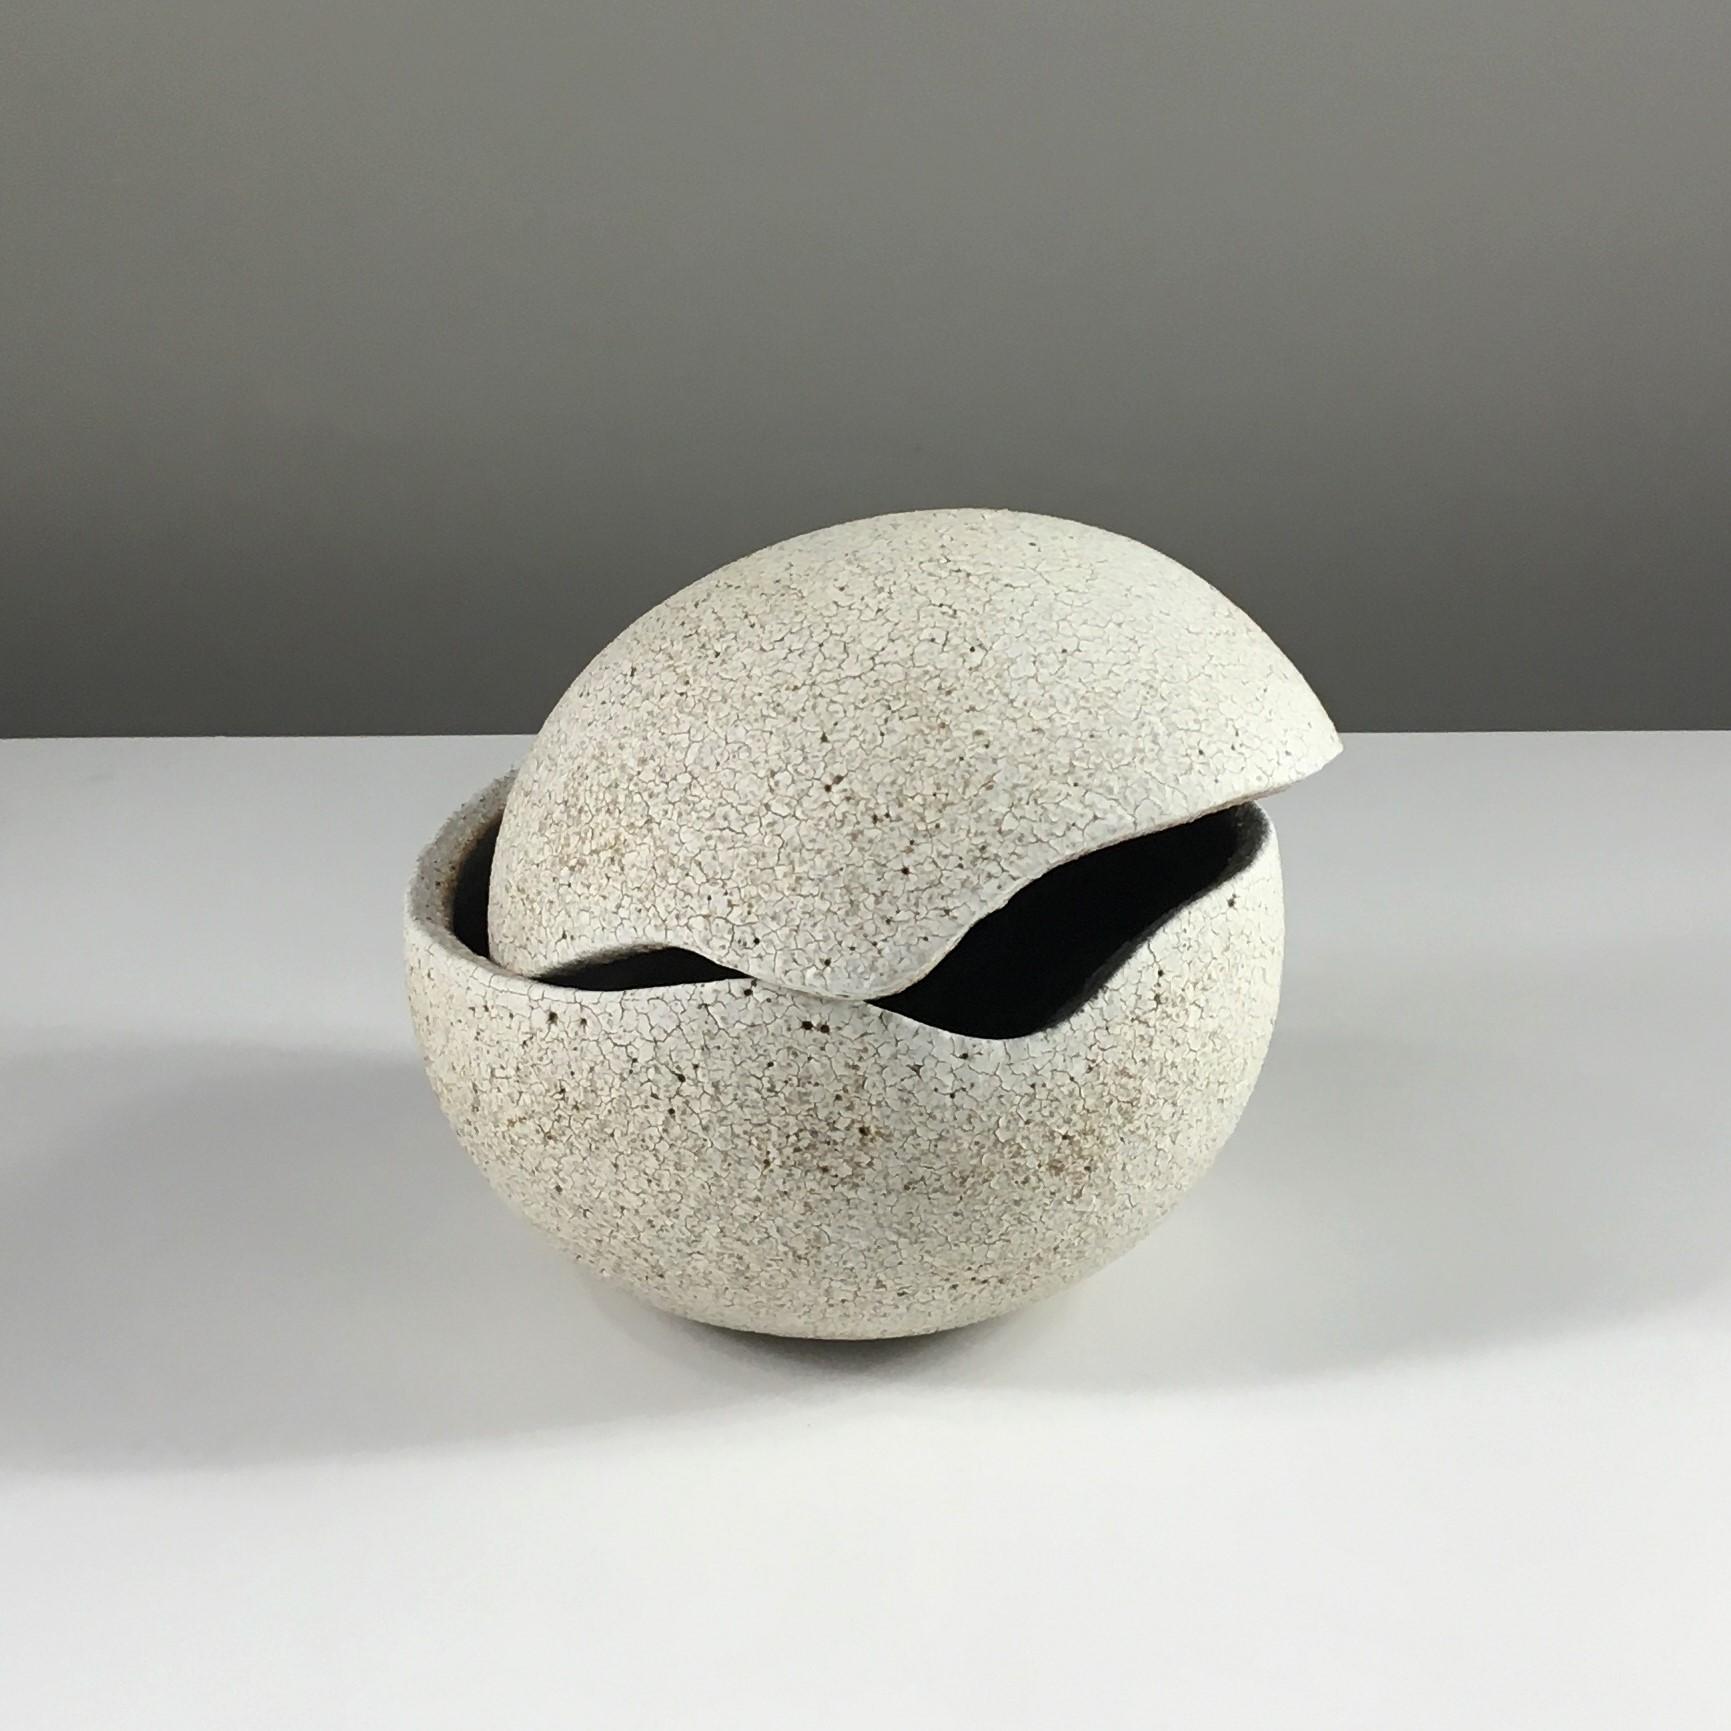 Covered Orb Vessel by Yumiko Kuga. Dimensions:  Height 5